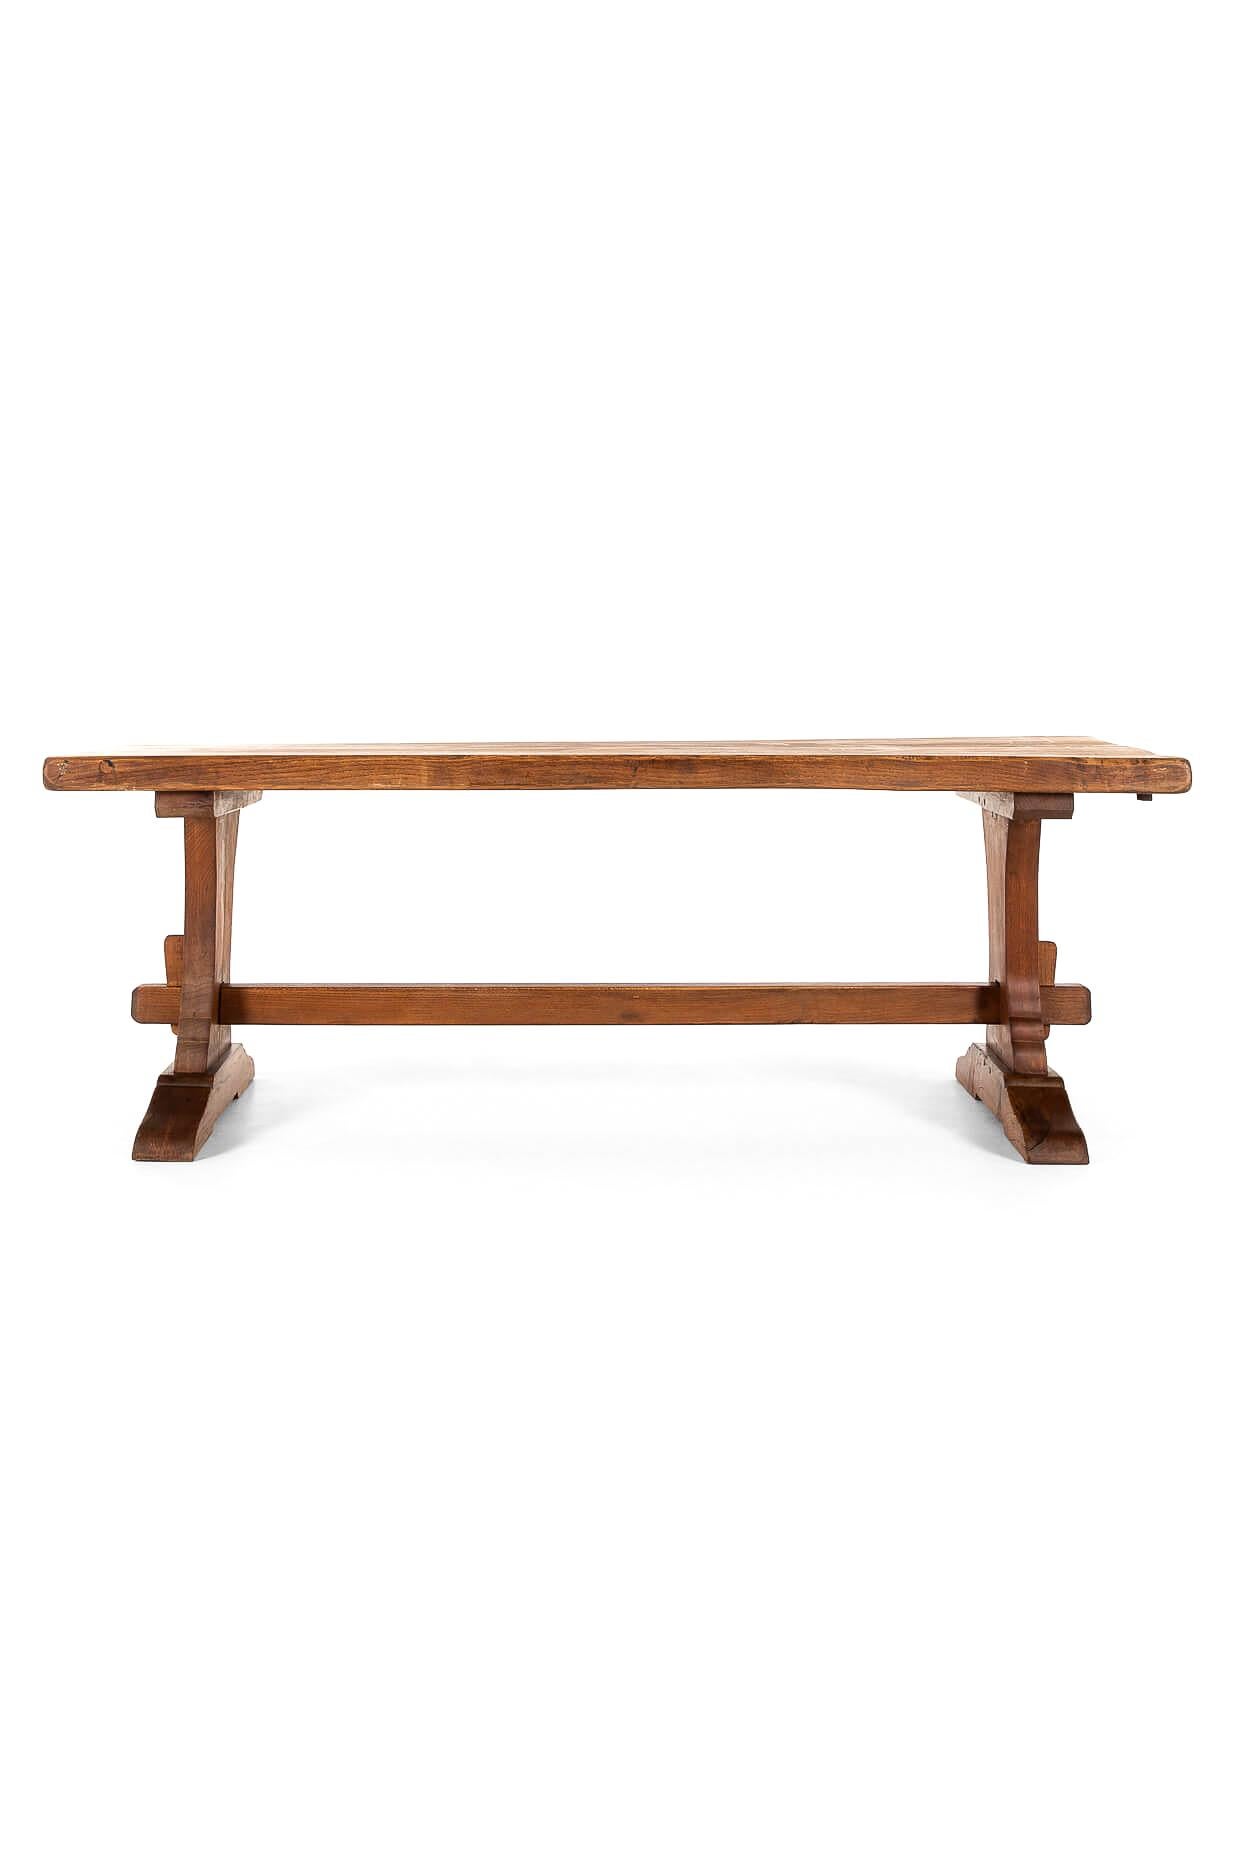 Late Victorian French Oak Monastery Table For Sale